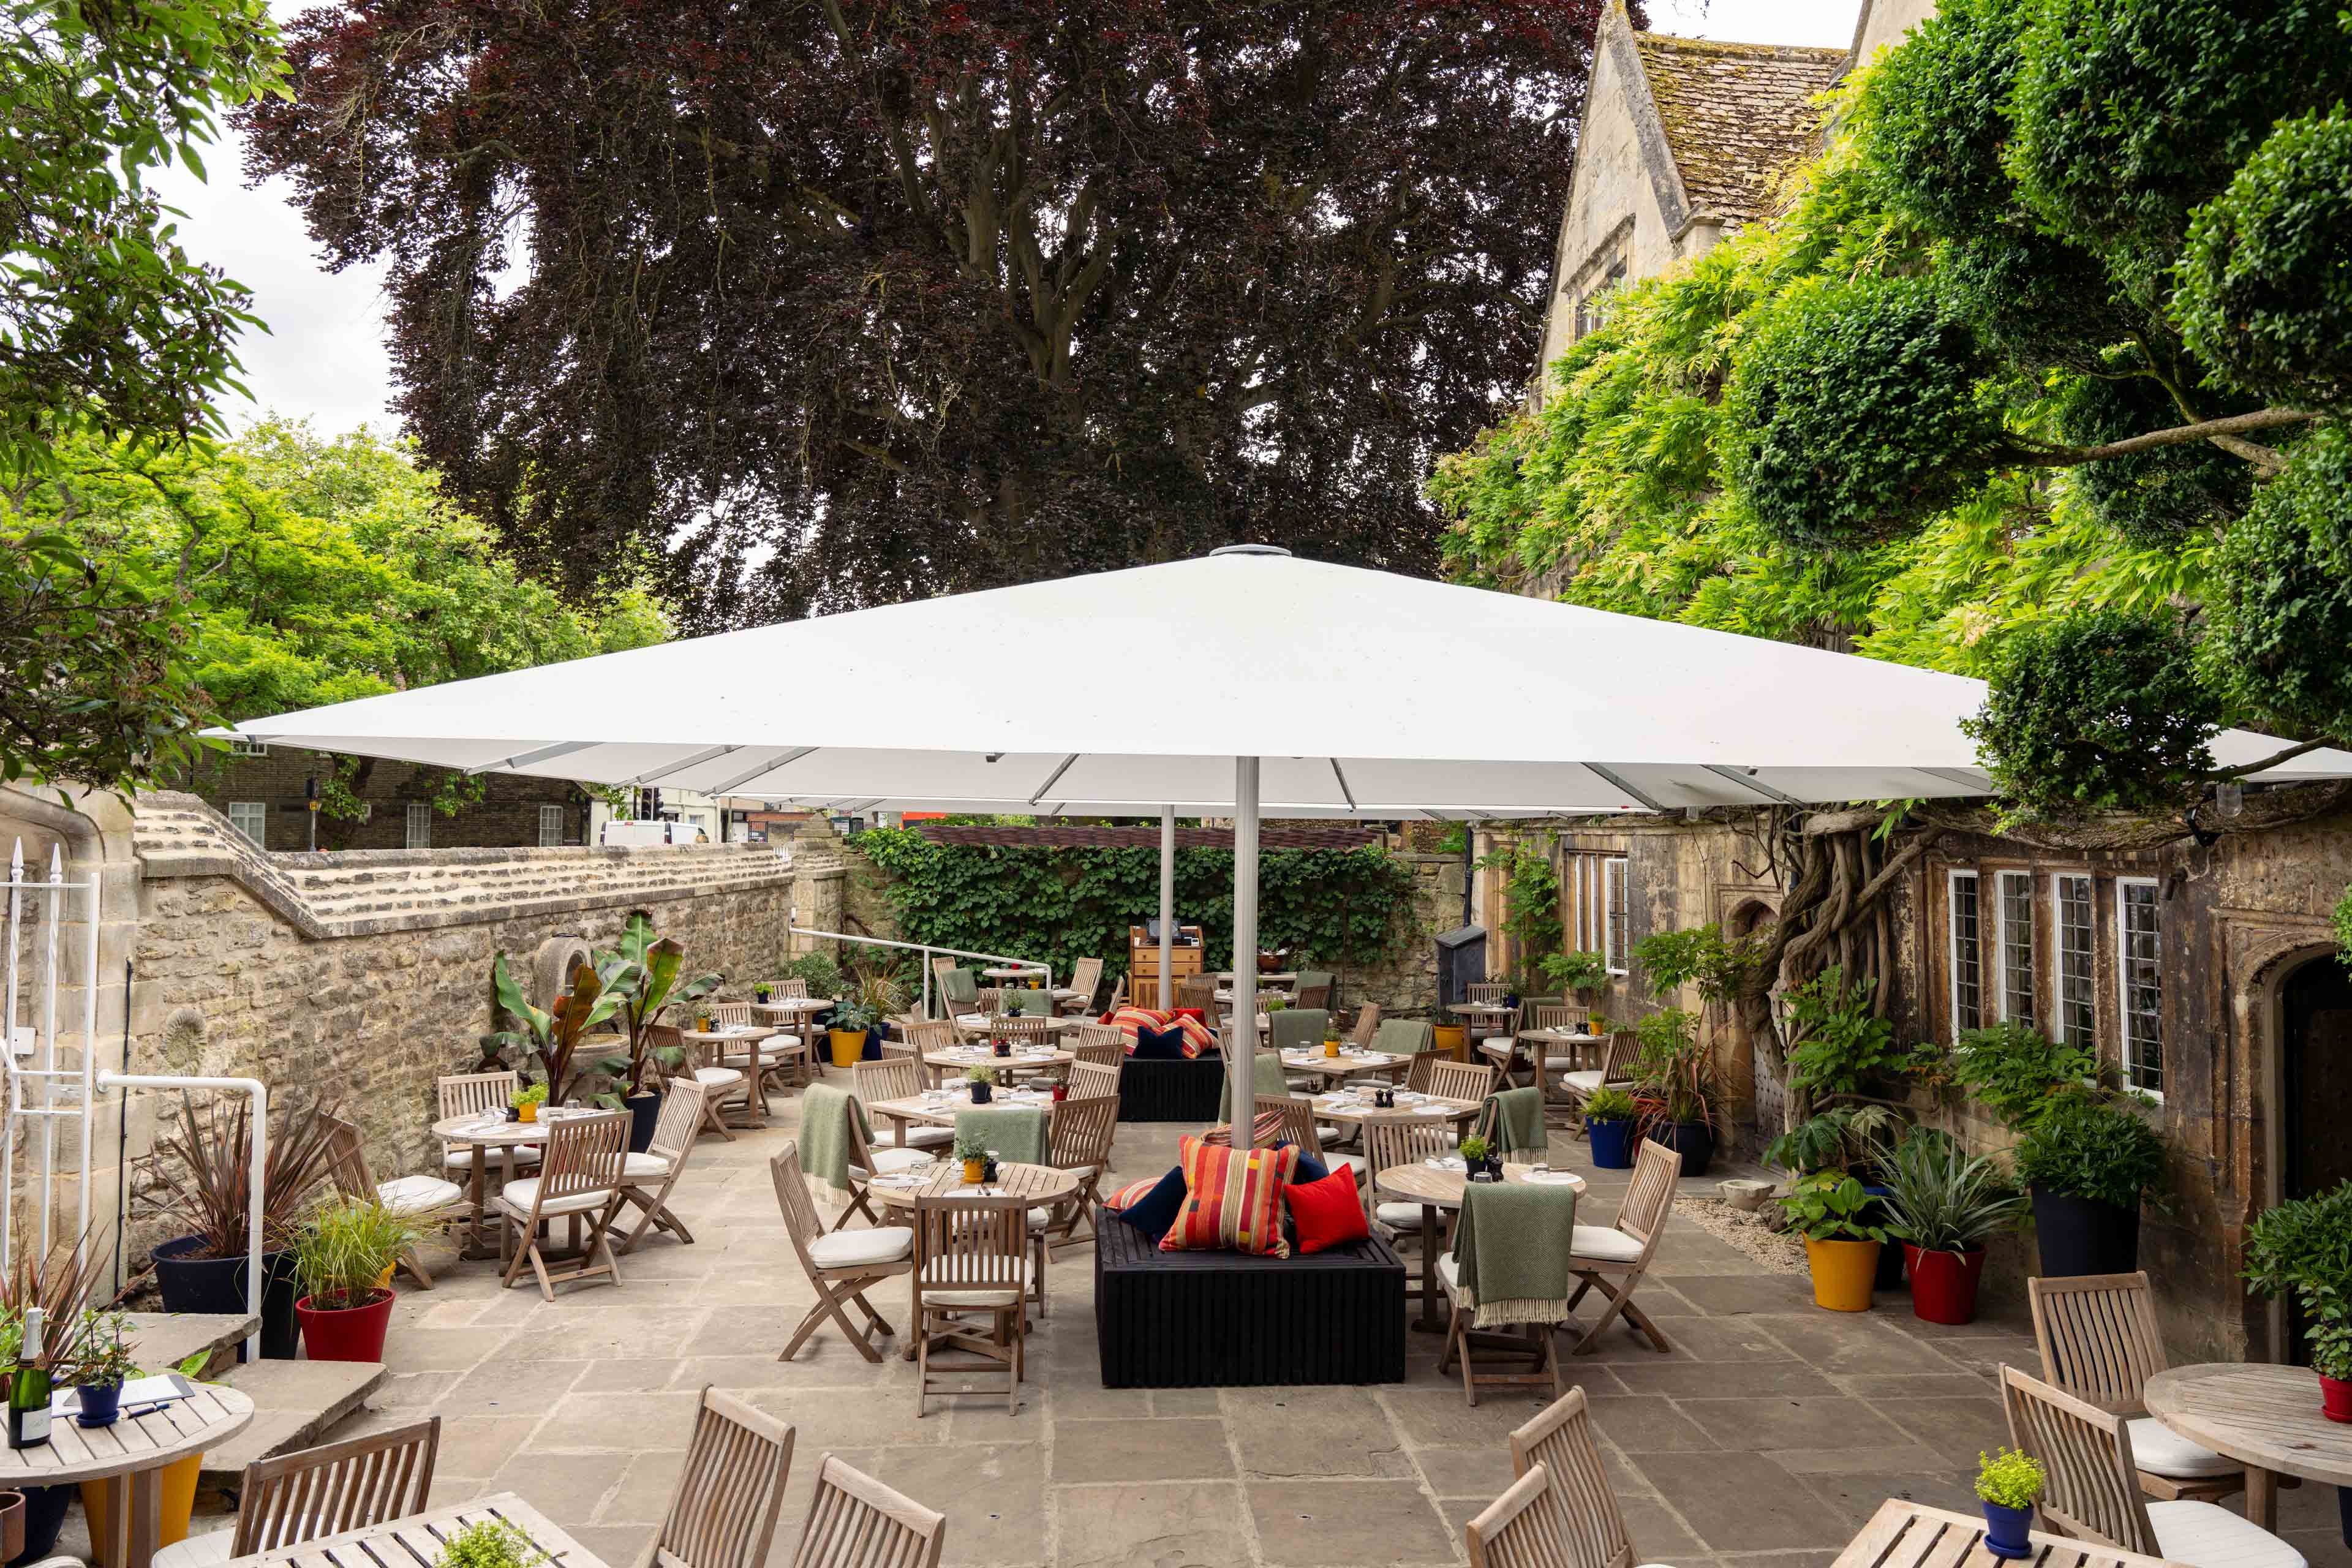 A7R03754 - 2024 - Parsonage Grill - Oxford - High res - Outdoor Terrace Exterior X - Web Hero